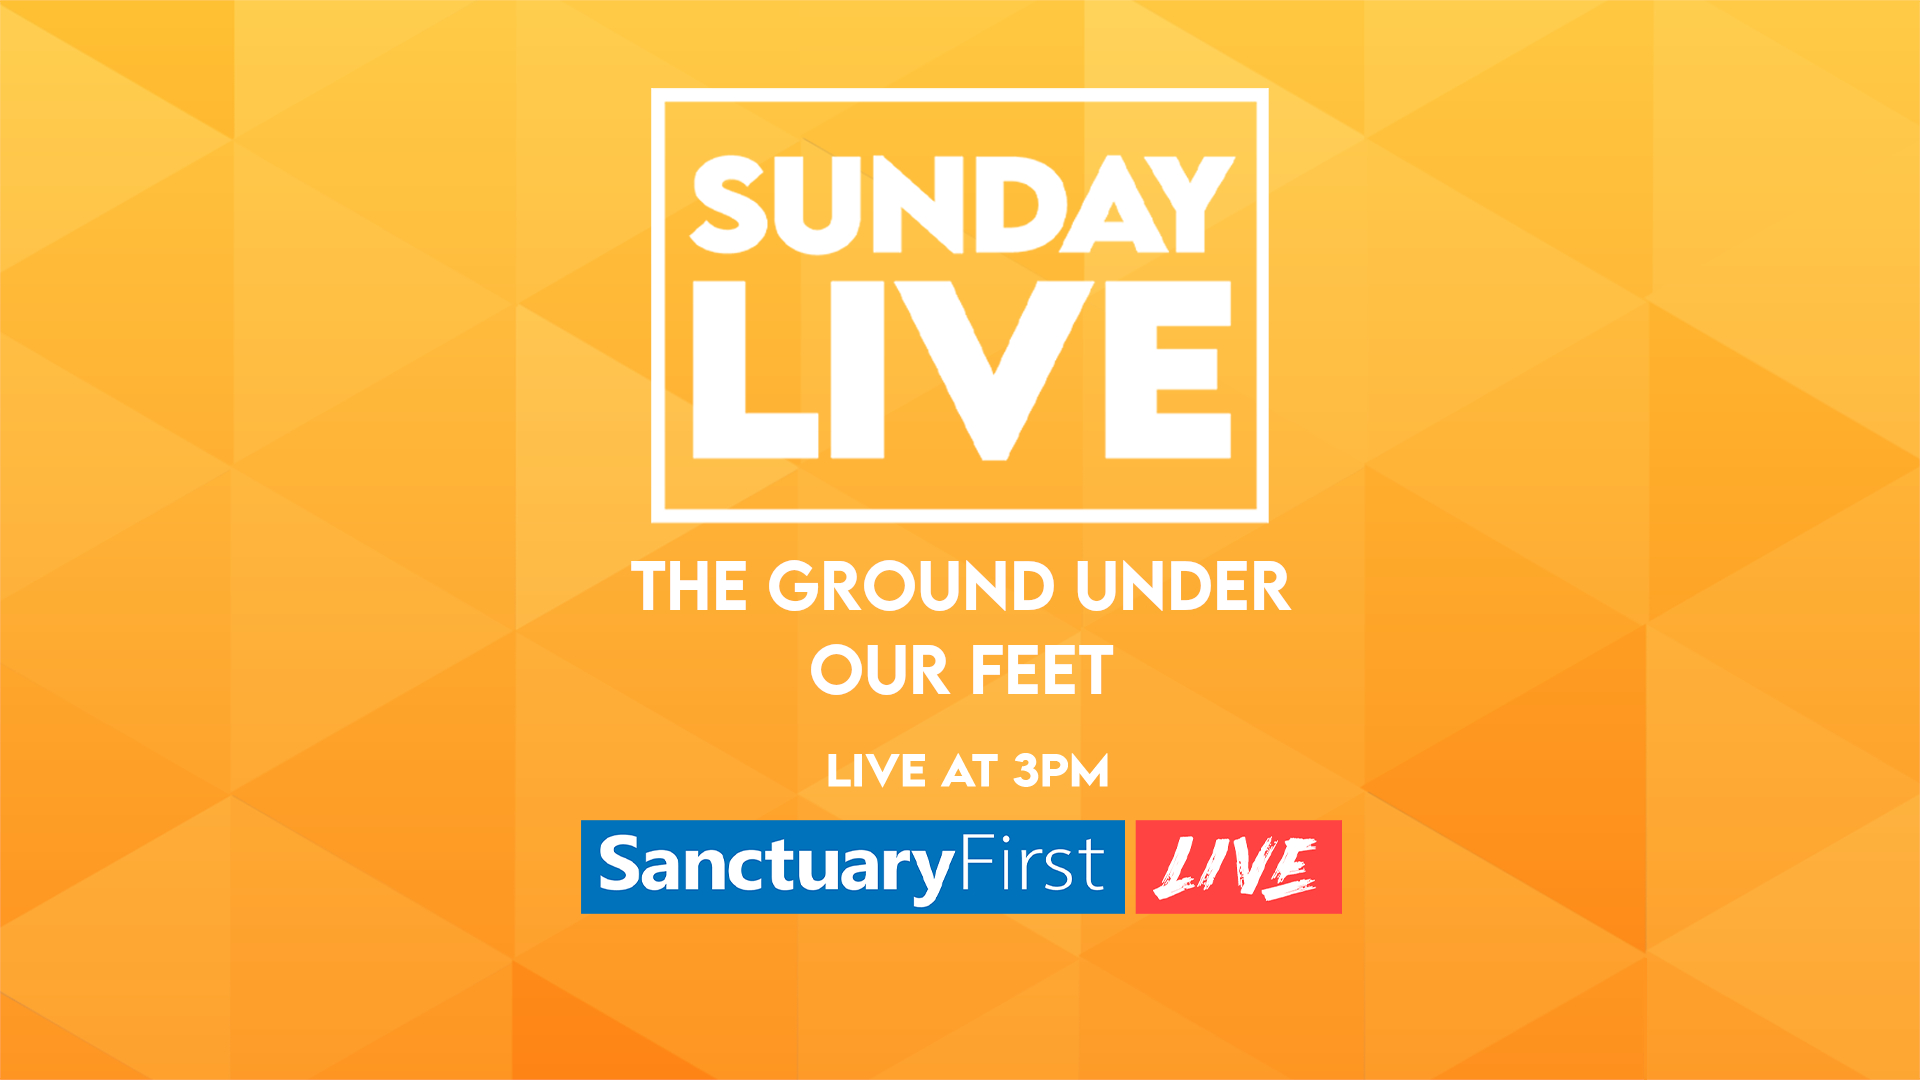 Sunday Live - The ground under our feet